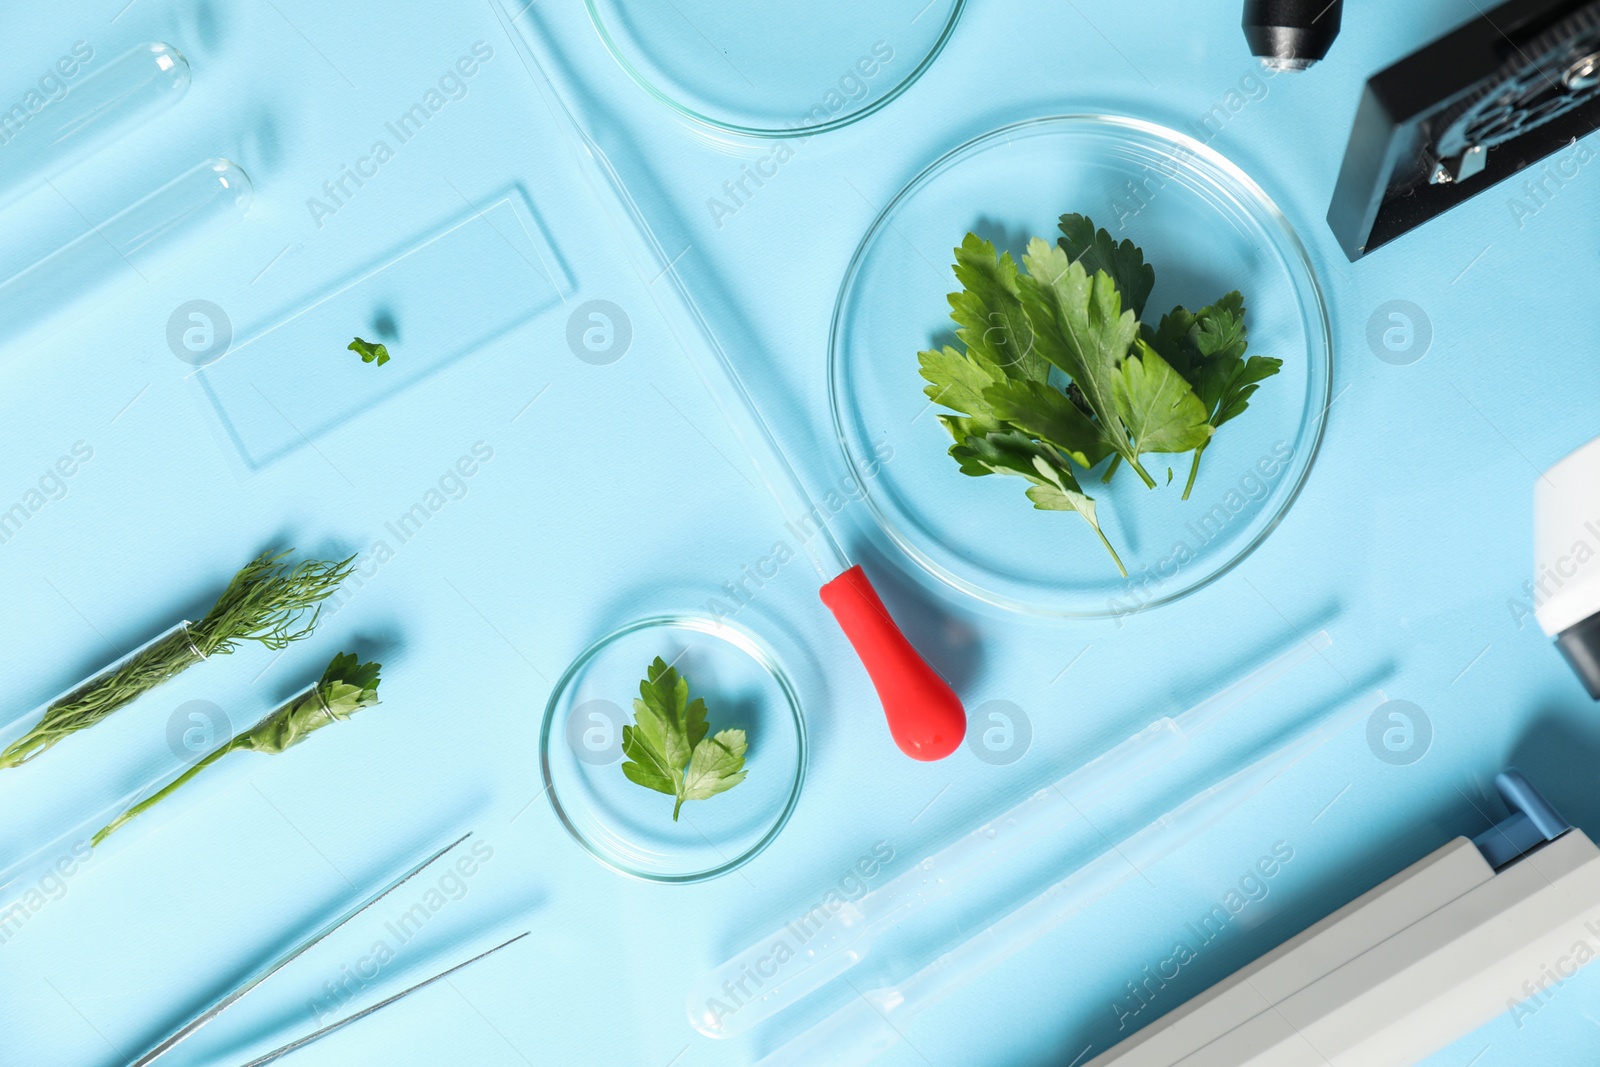 Photo of Food Quality Control. Microscope, petri dishes with herbs and other laboratory equipment on light blue background, flat lay